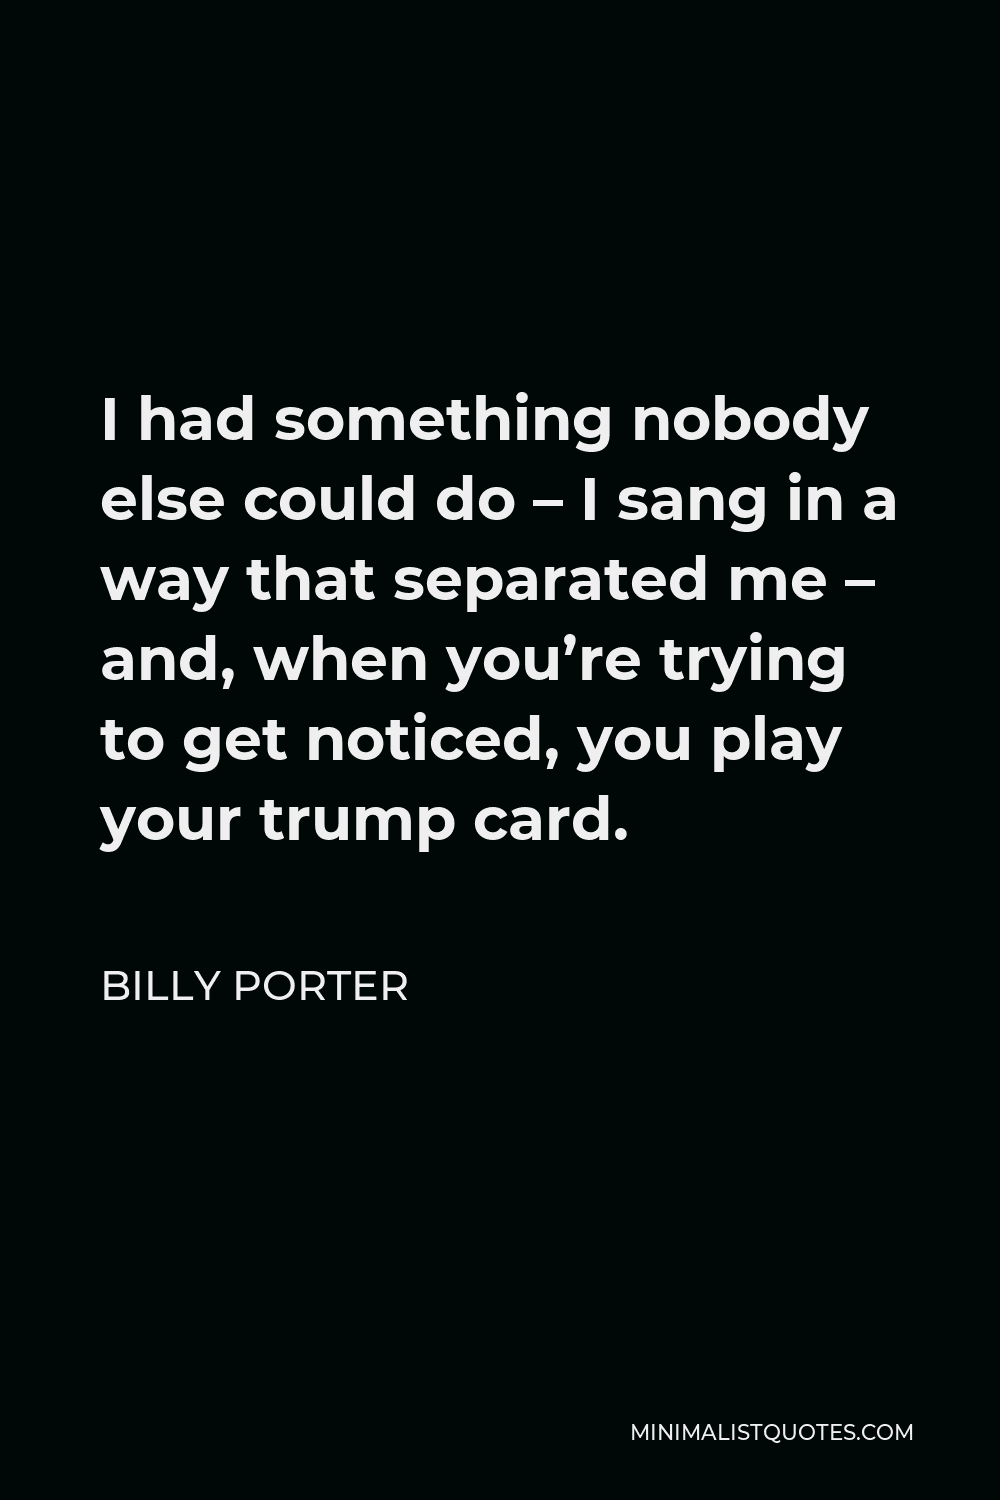 Billy Porter Quote - I had something nobody else could do – I sang in a way that separated me – and, when you’re trying to get noticed, you play your trump card.